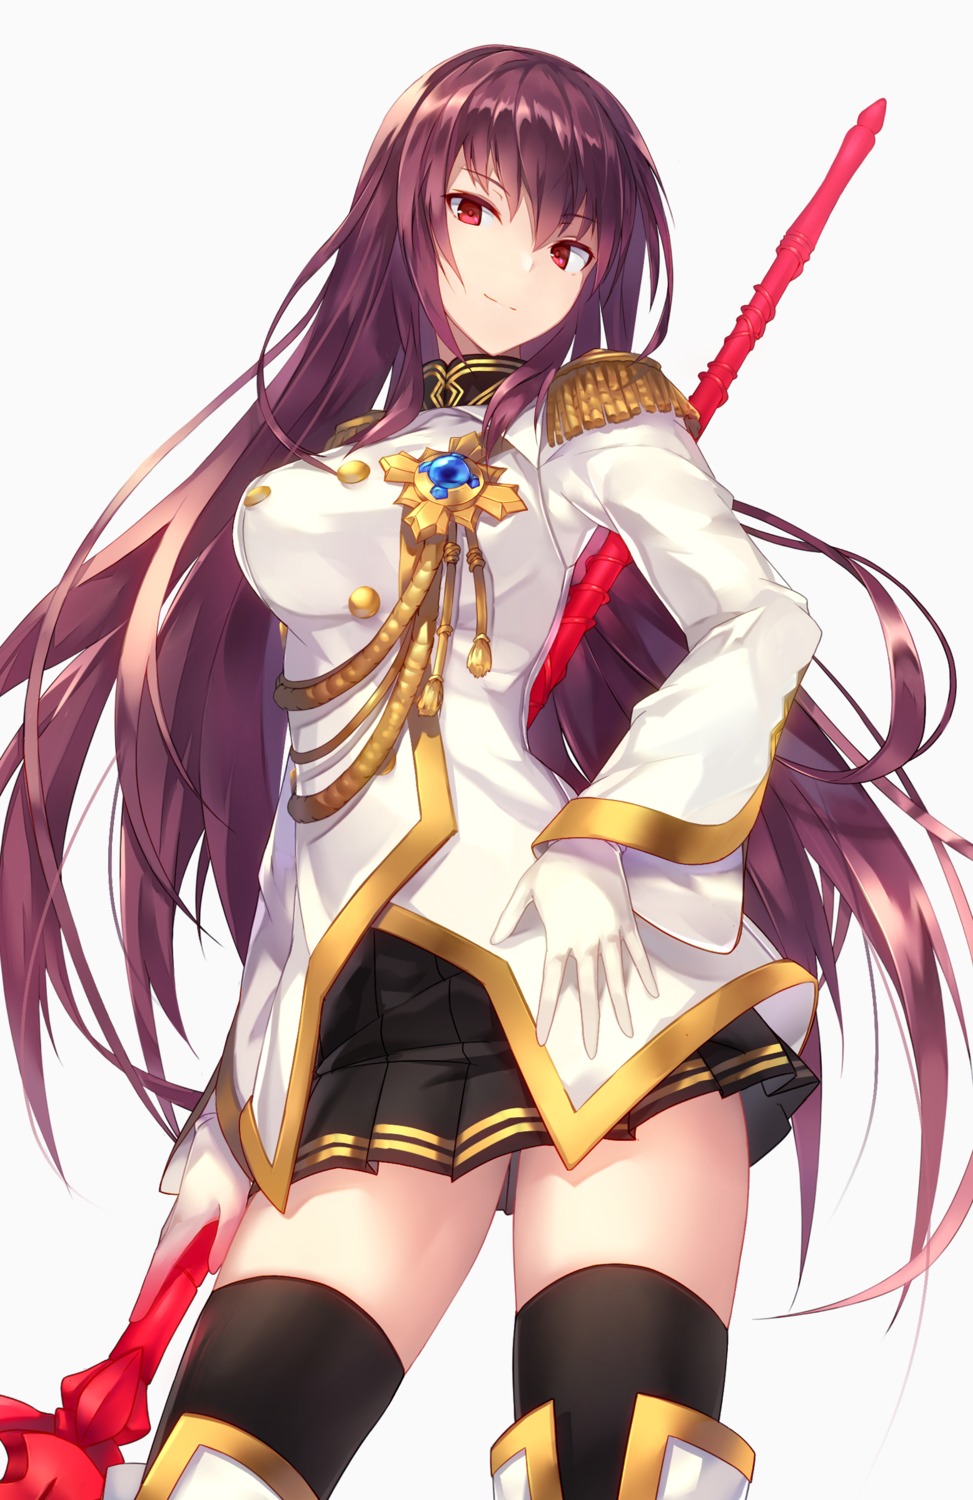 fate/extella_link fate/grand_order metindone scathach_(fate/grand_order) thighhighs uniform weapon